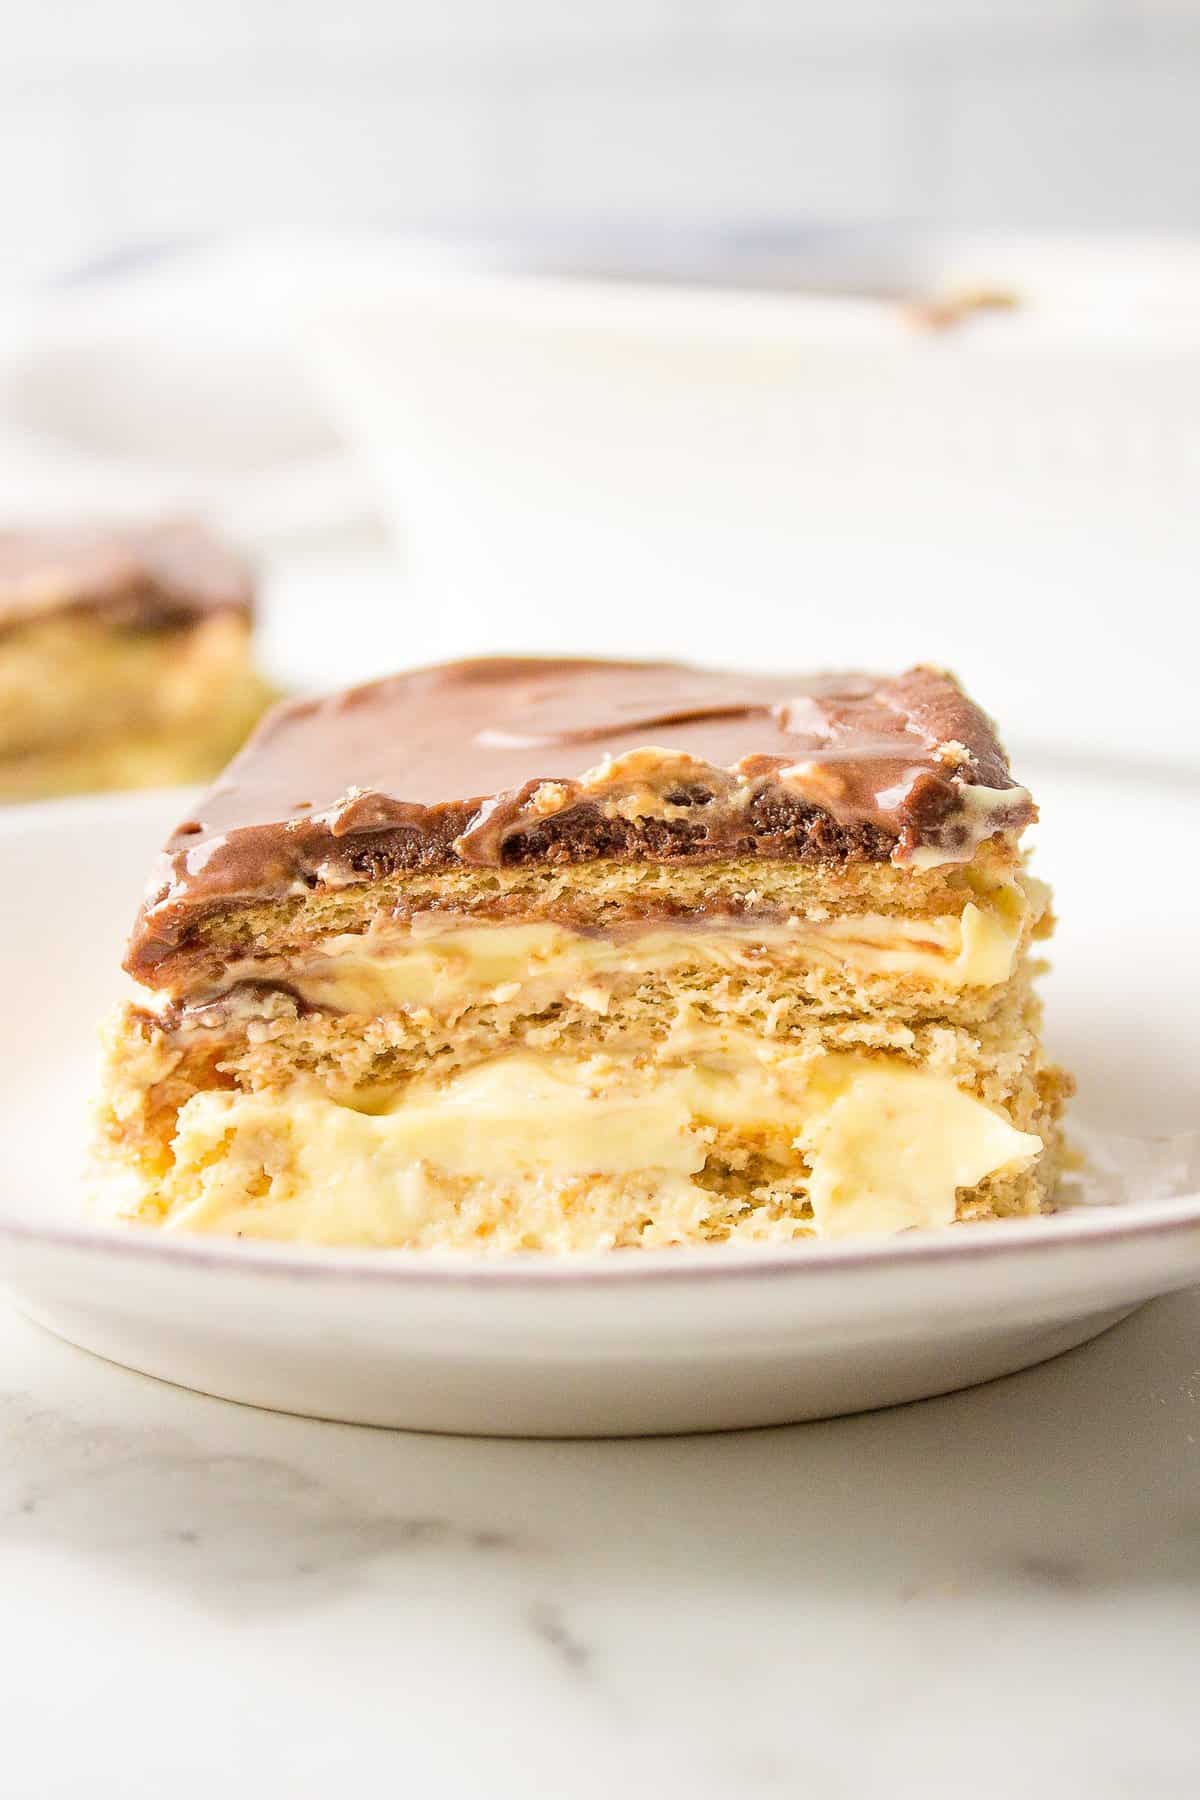 cross section image of a slice serving of no bake chocolate eclair cake served on a white plate